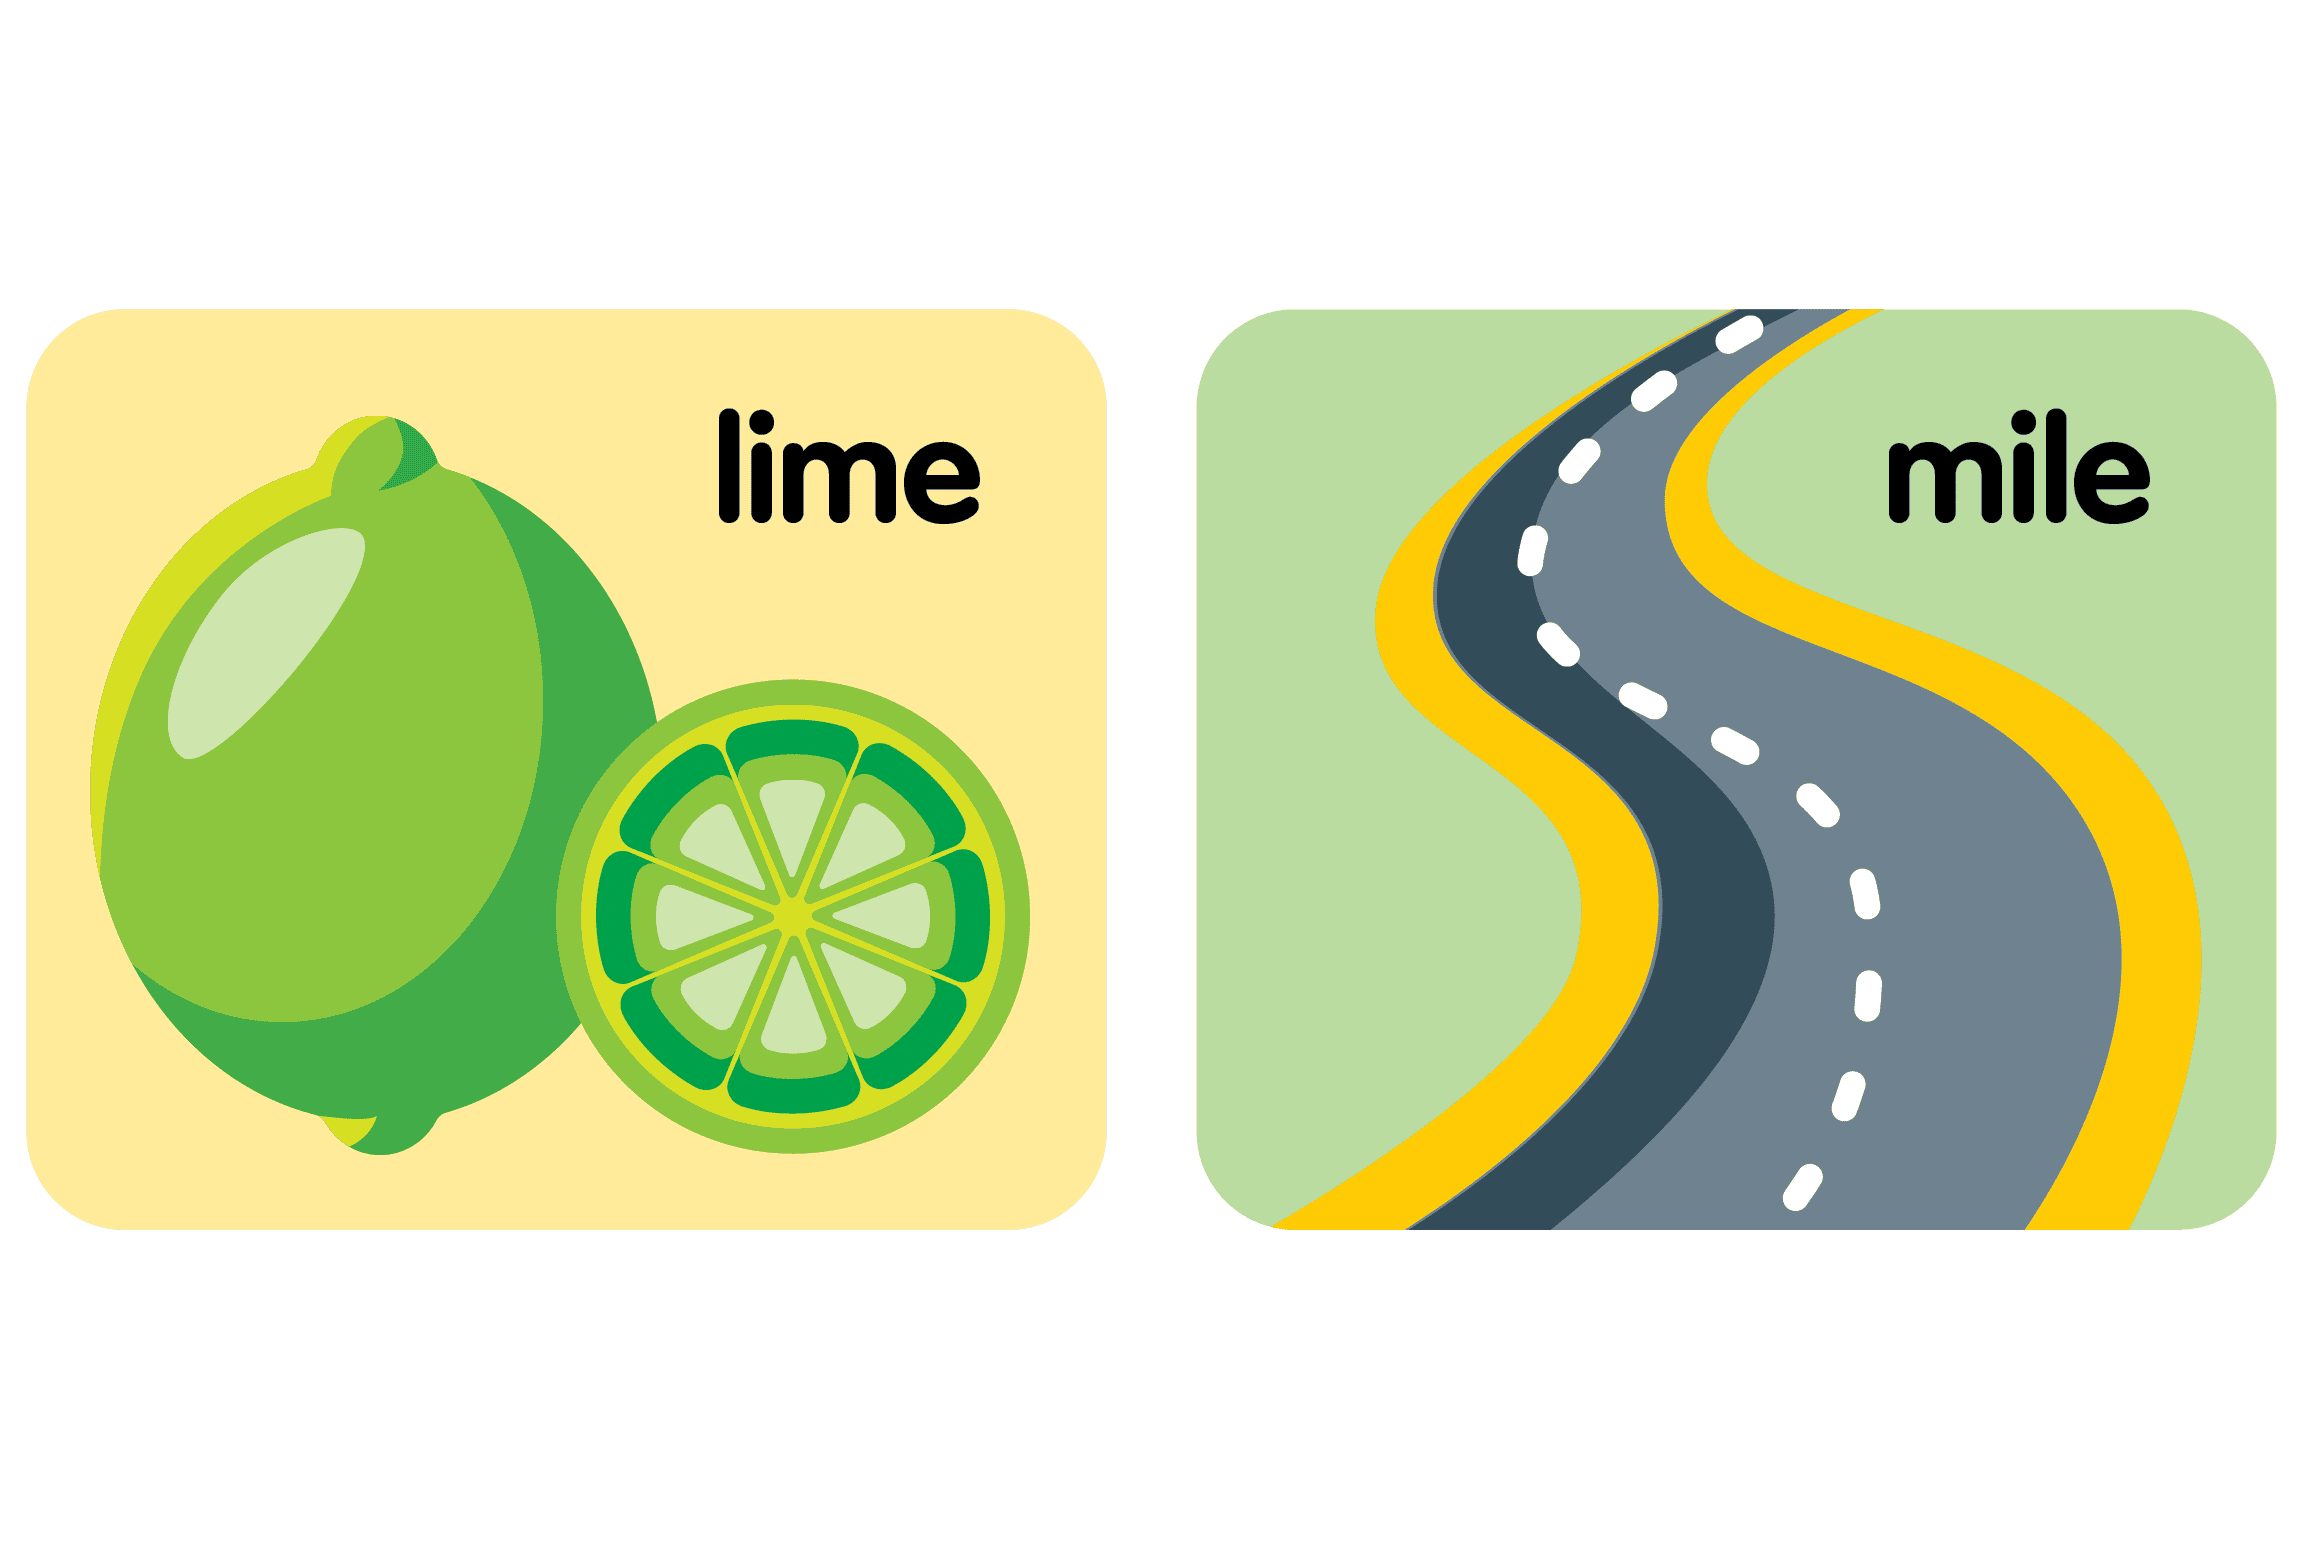 Image of a lime, with the word LIME written next to it. Image of a road, with the word MILE written next to it. For phonemic awareness practice.